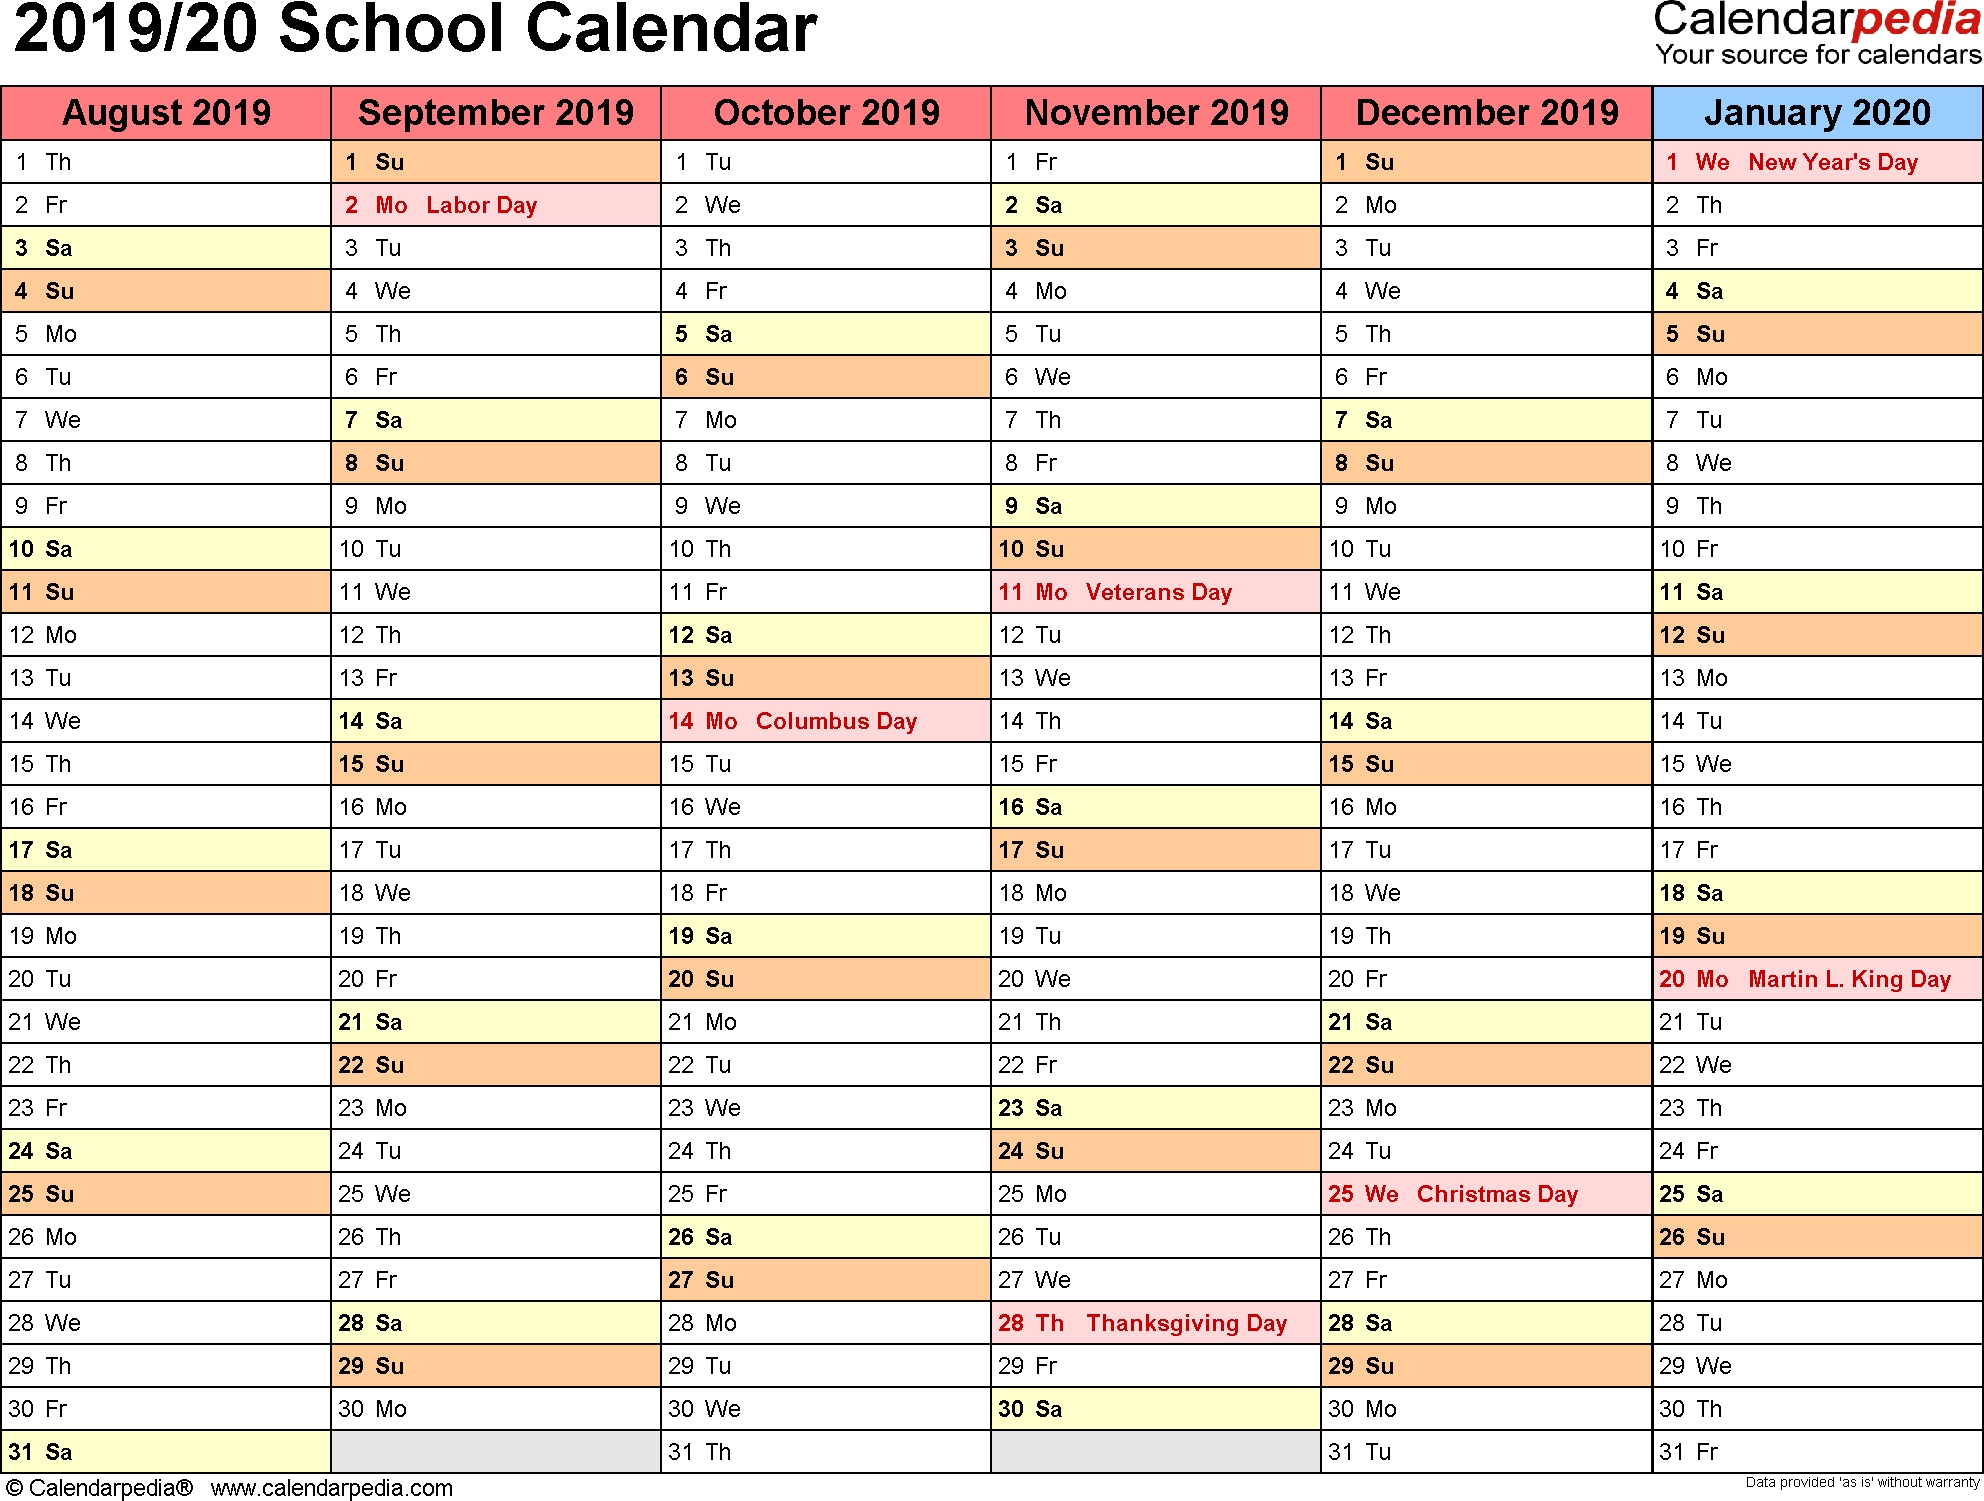 School Calendars 2019/2020 As Free Printable Pdf Templates within Year At A Glance Calendar School Year 2019-2020 Free Printable